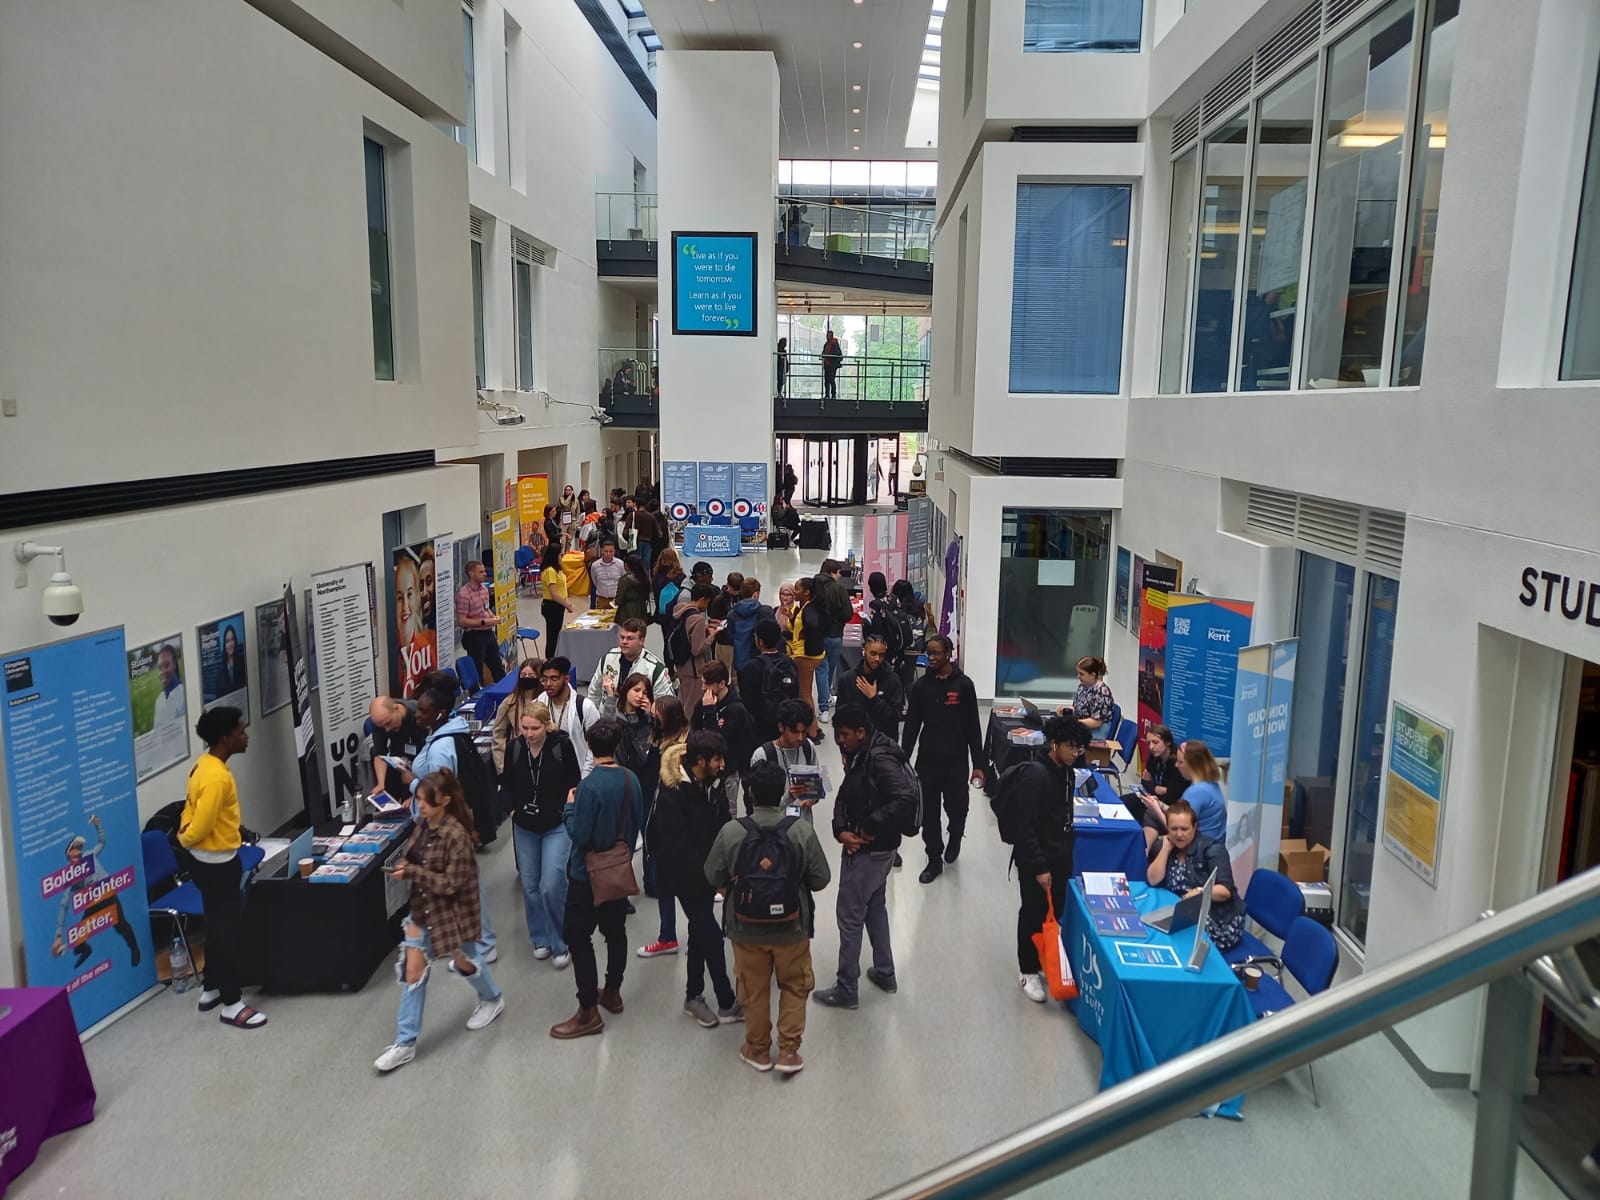 Futures Fair lights the way for students considering higher education